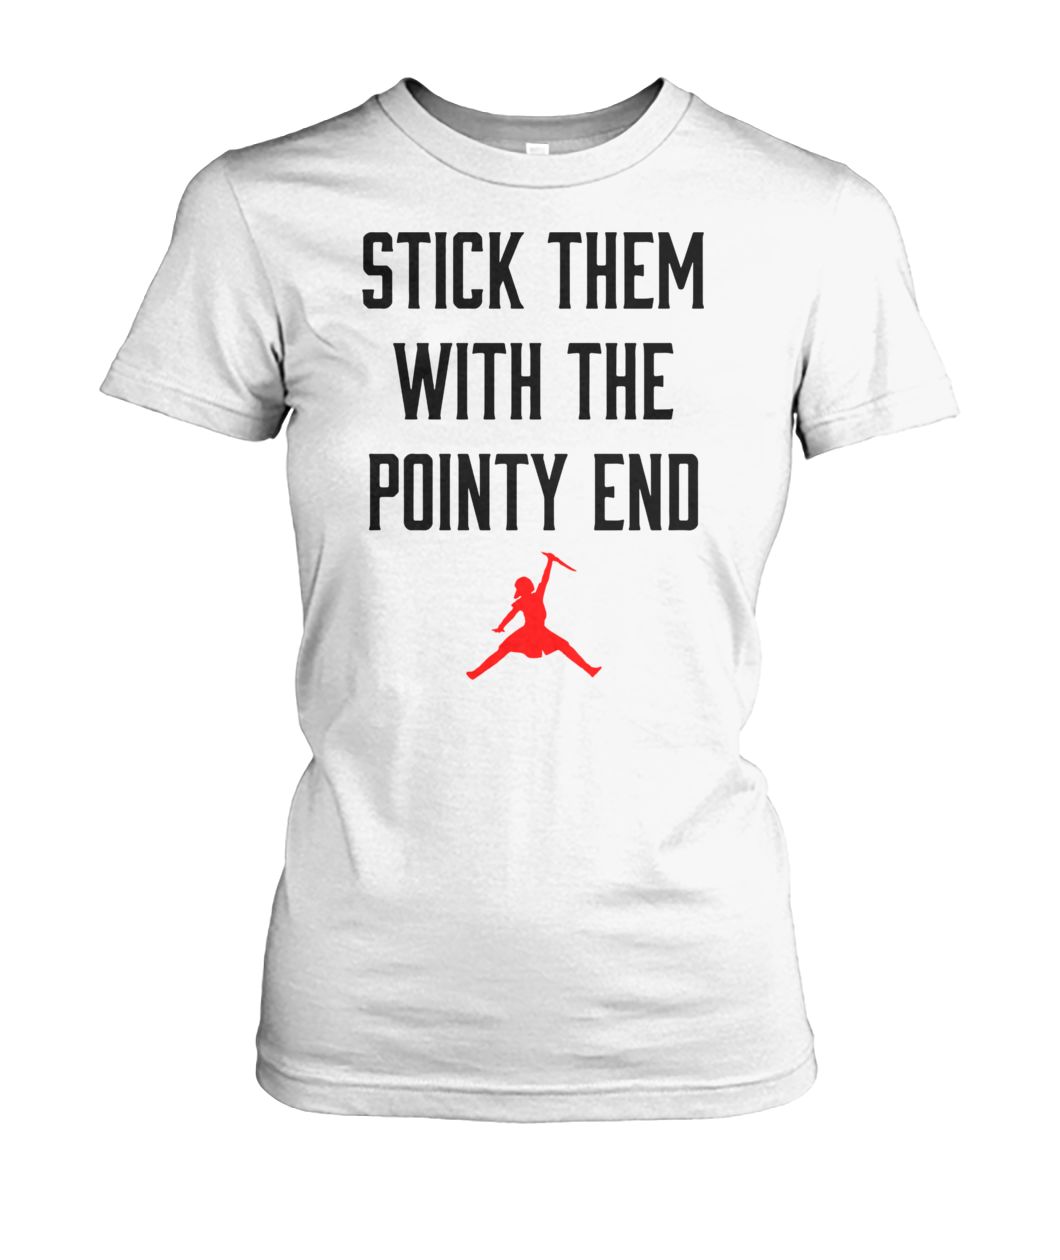 Game of thrones arya stark air jordan stick them with the pointy end women's crew tee